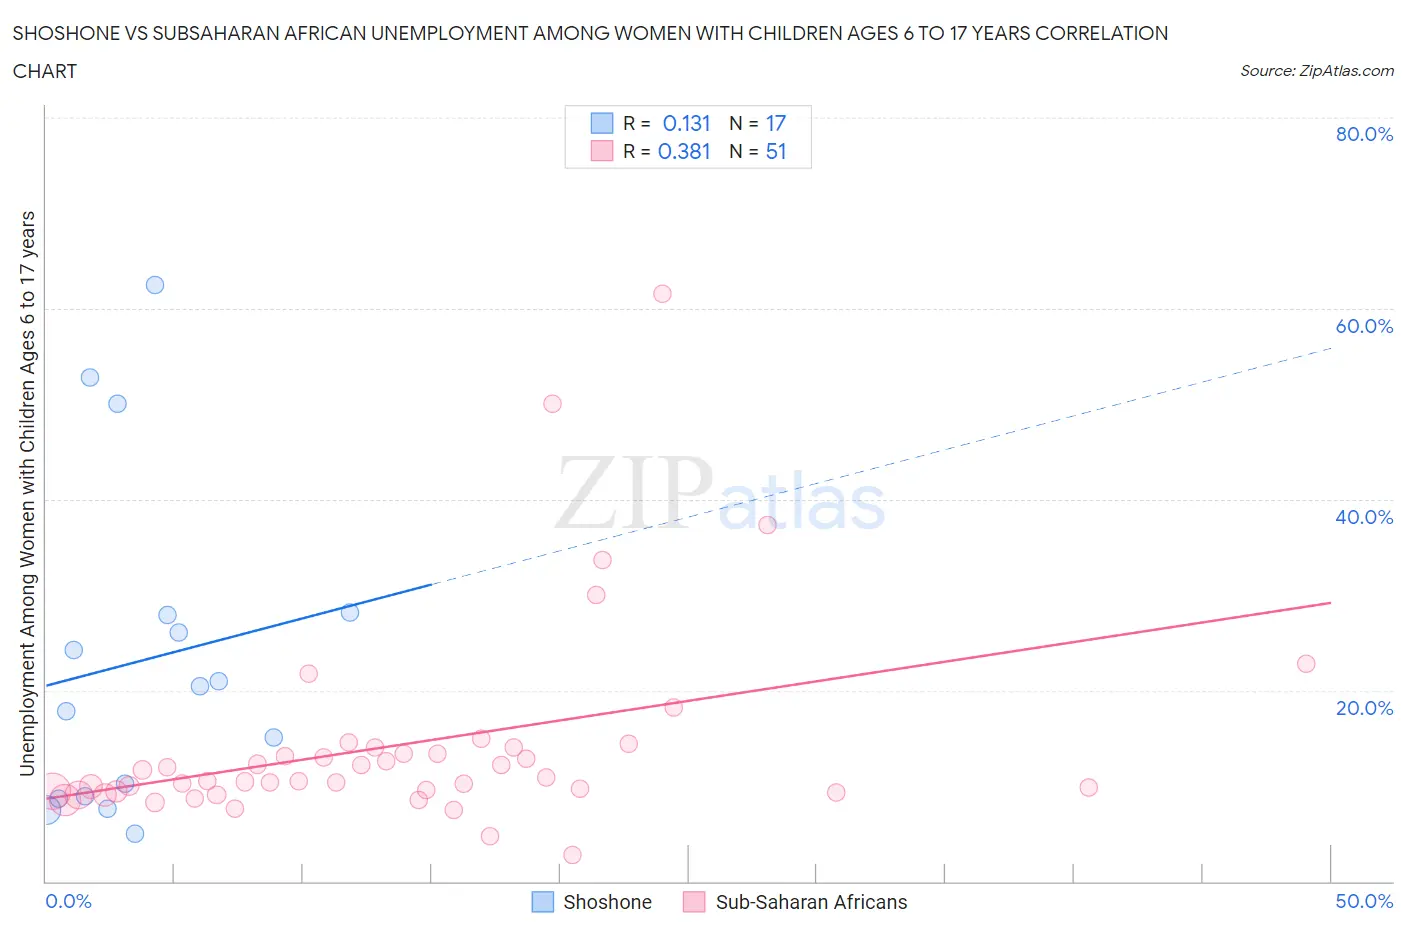 Shoshone vs Subsaharan African Unemployment Among Women with Children Ages 6 to 17 years